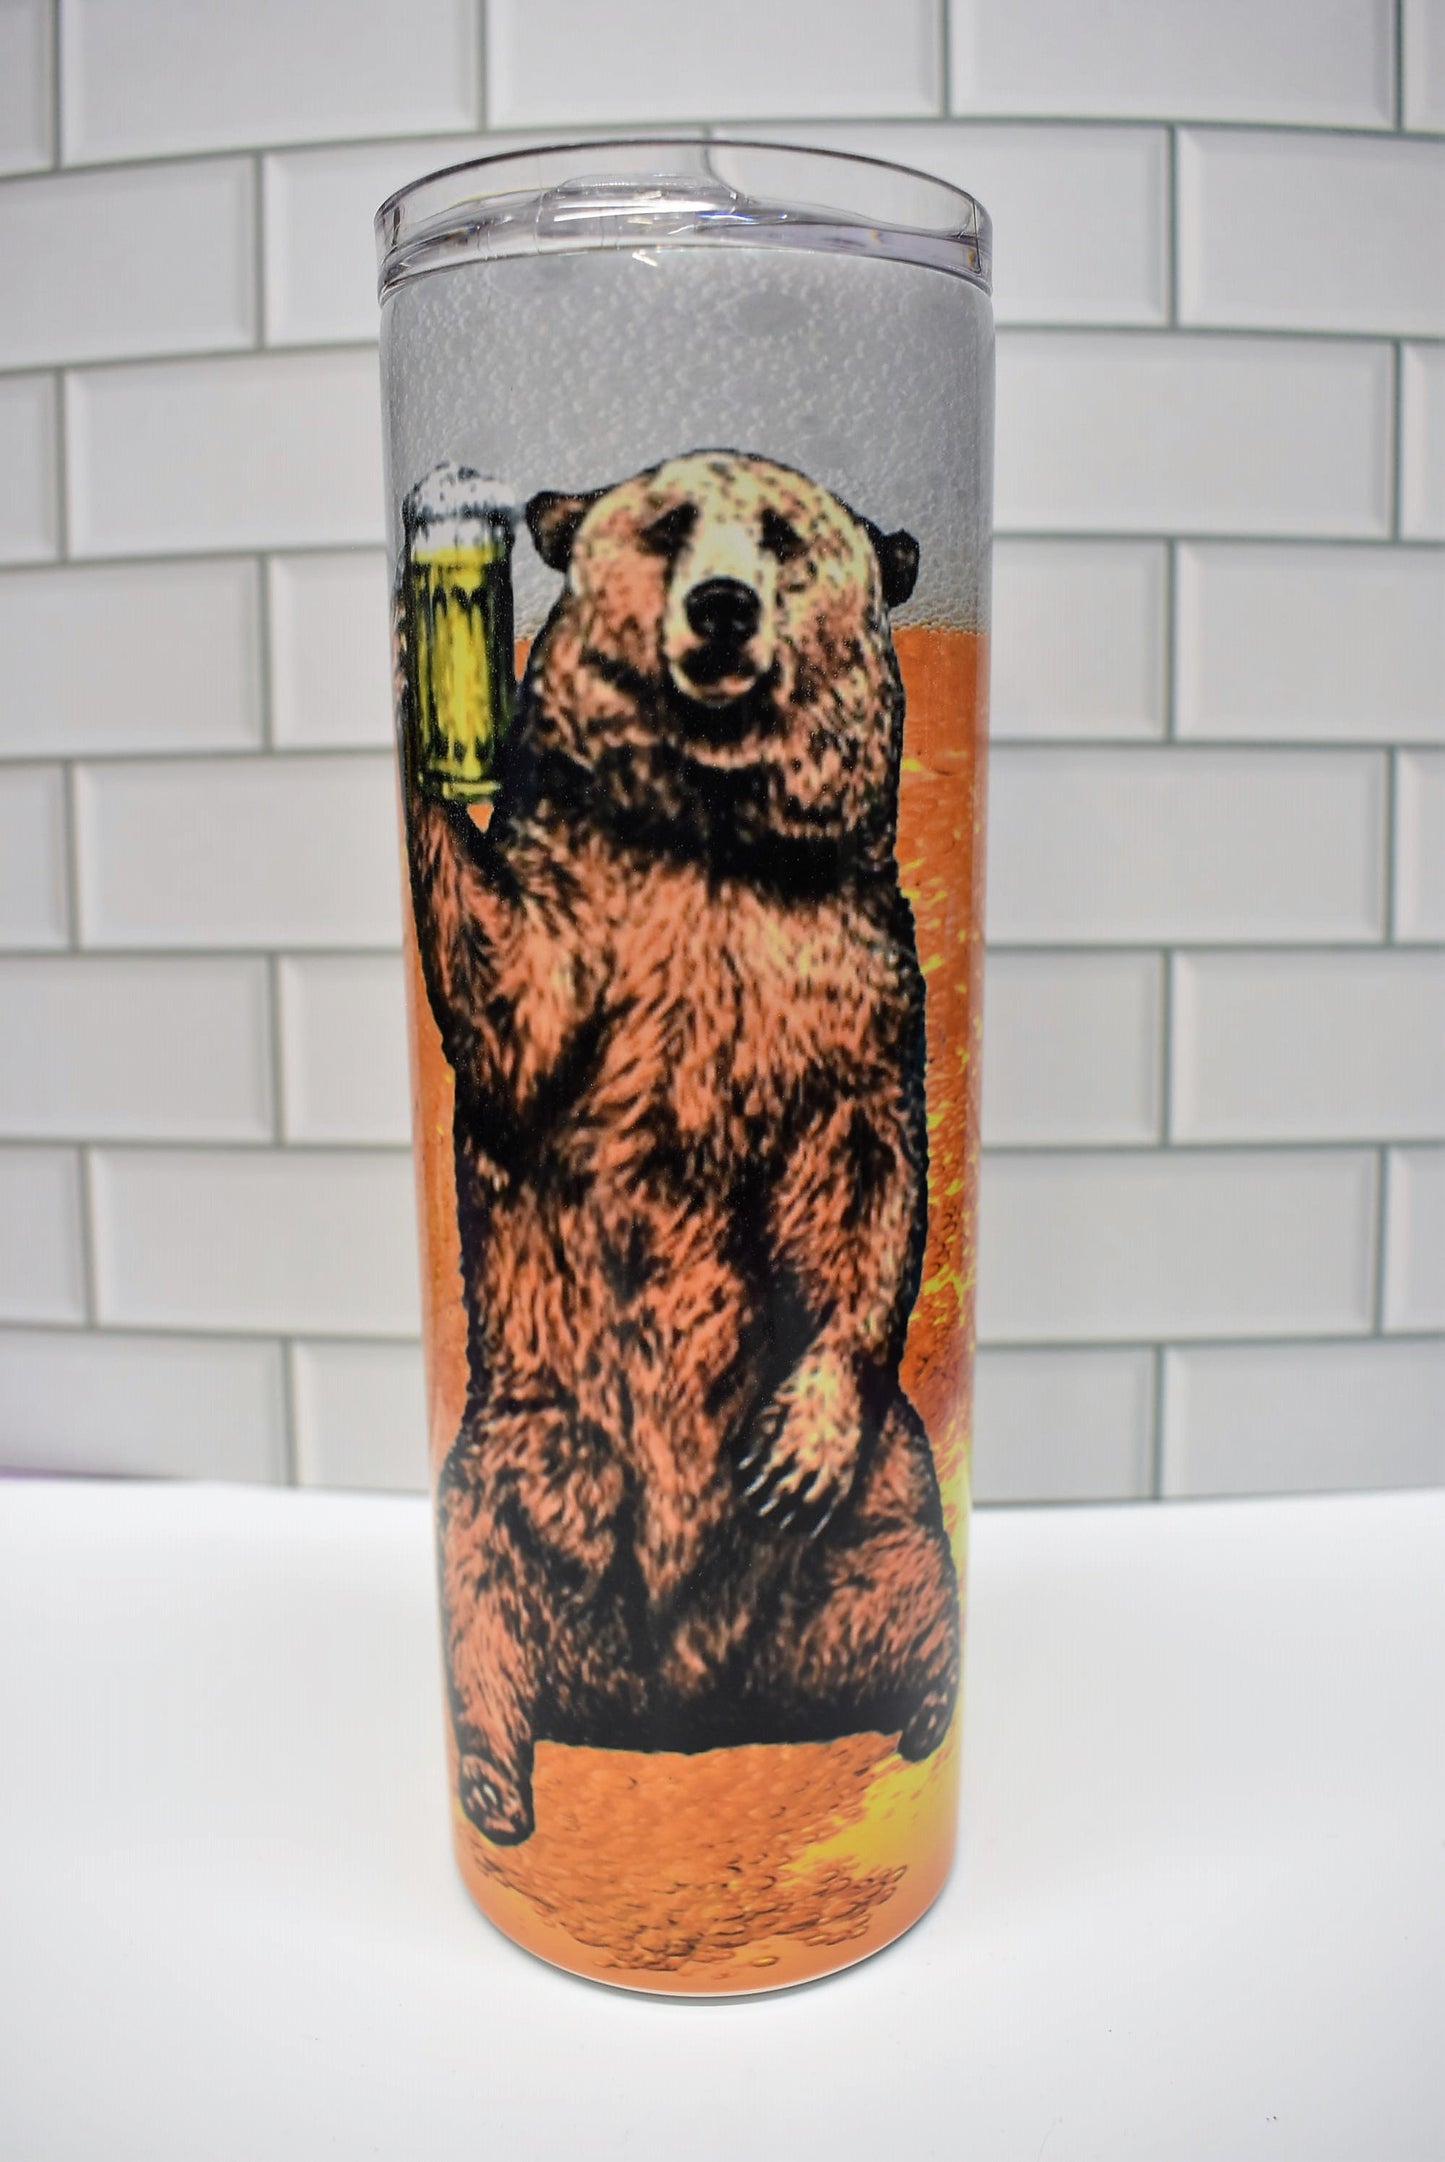 20 oz Stainless Steel tumbler. This Grizzly is always happy to lift a cold one. Cheers!